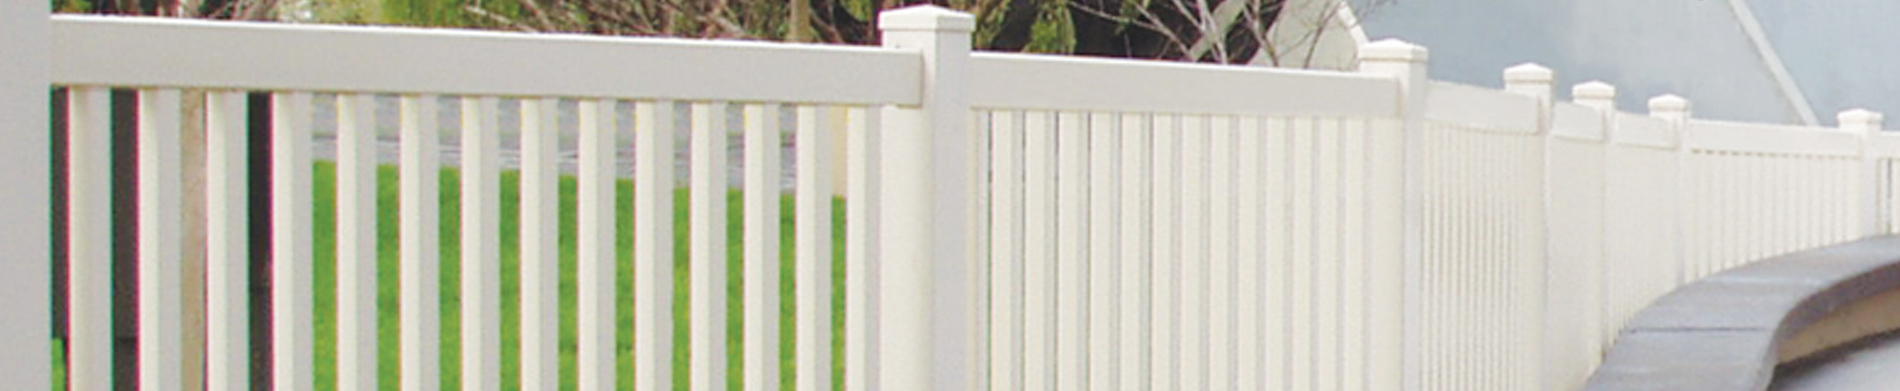 Looking for a vinyl fence in Orange County? Duramax caters to all your fencing requirements